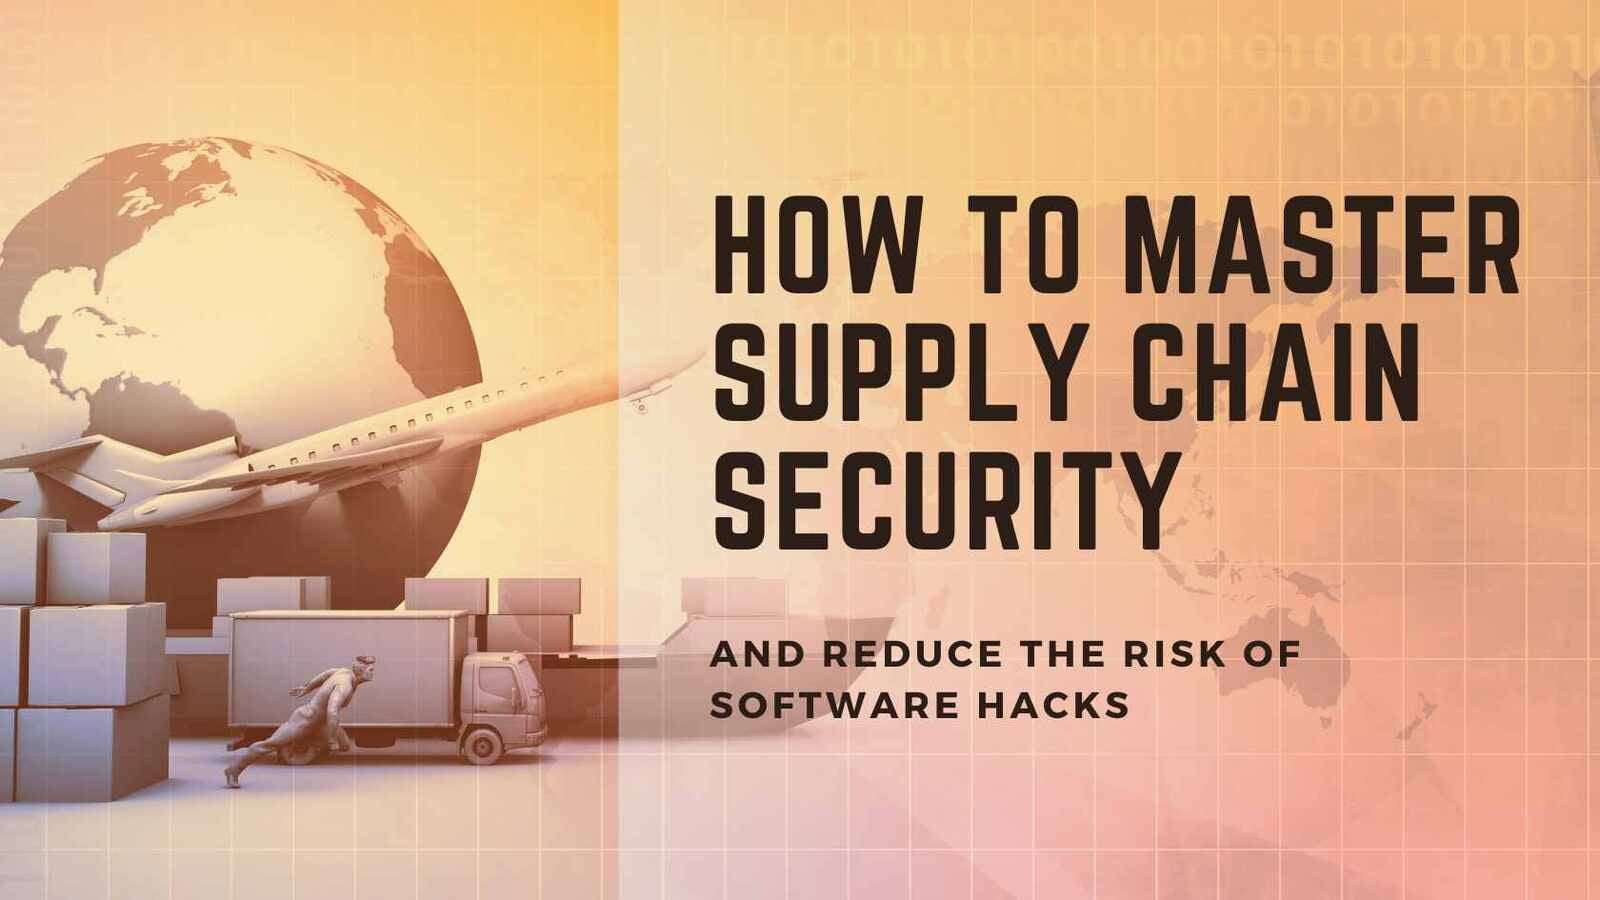 Master supply chain security: how to lessen the risk of software hacks